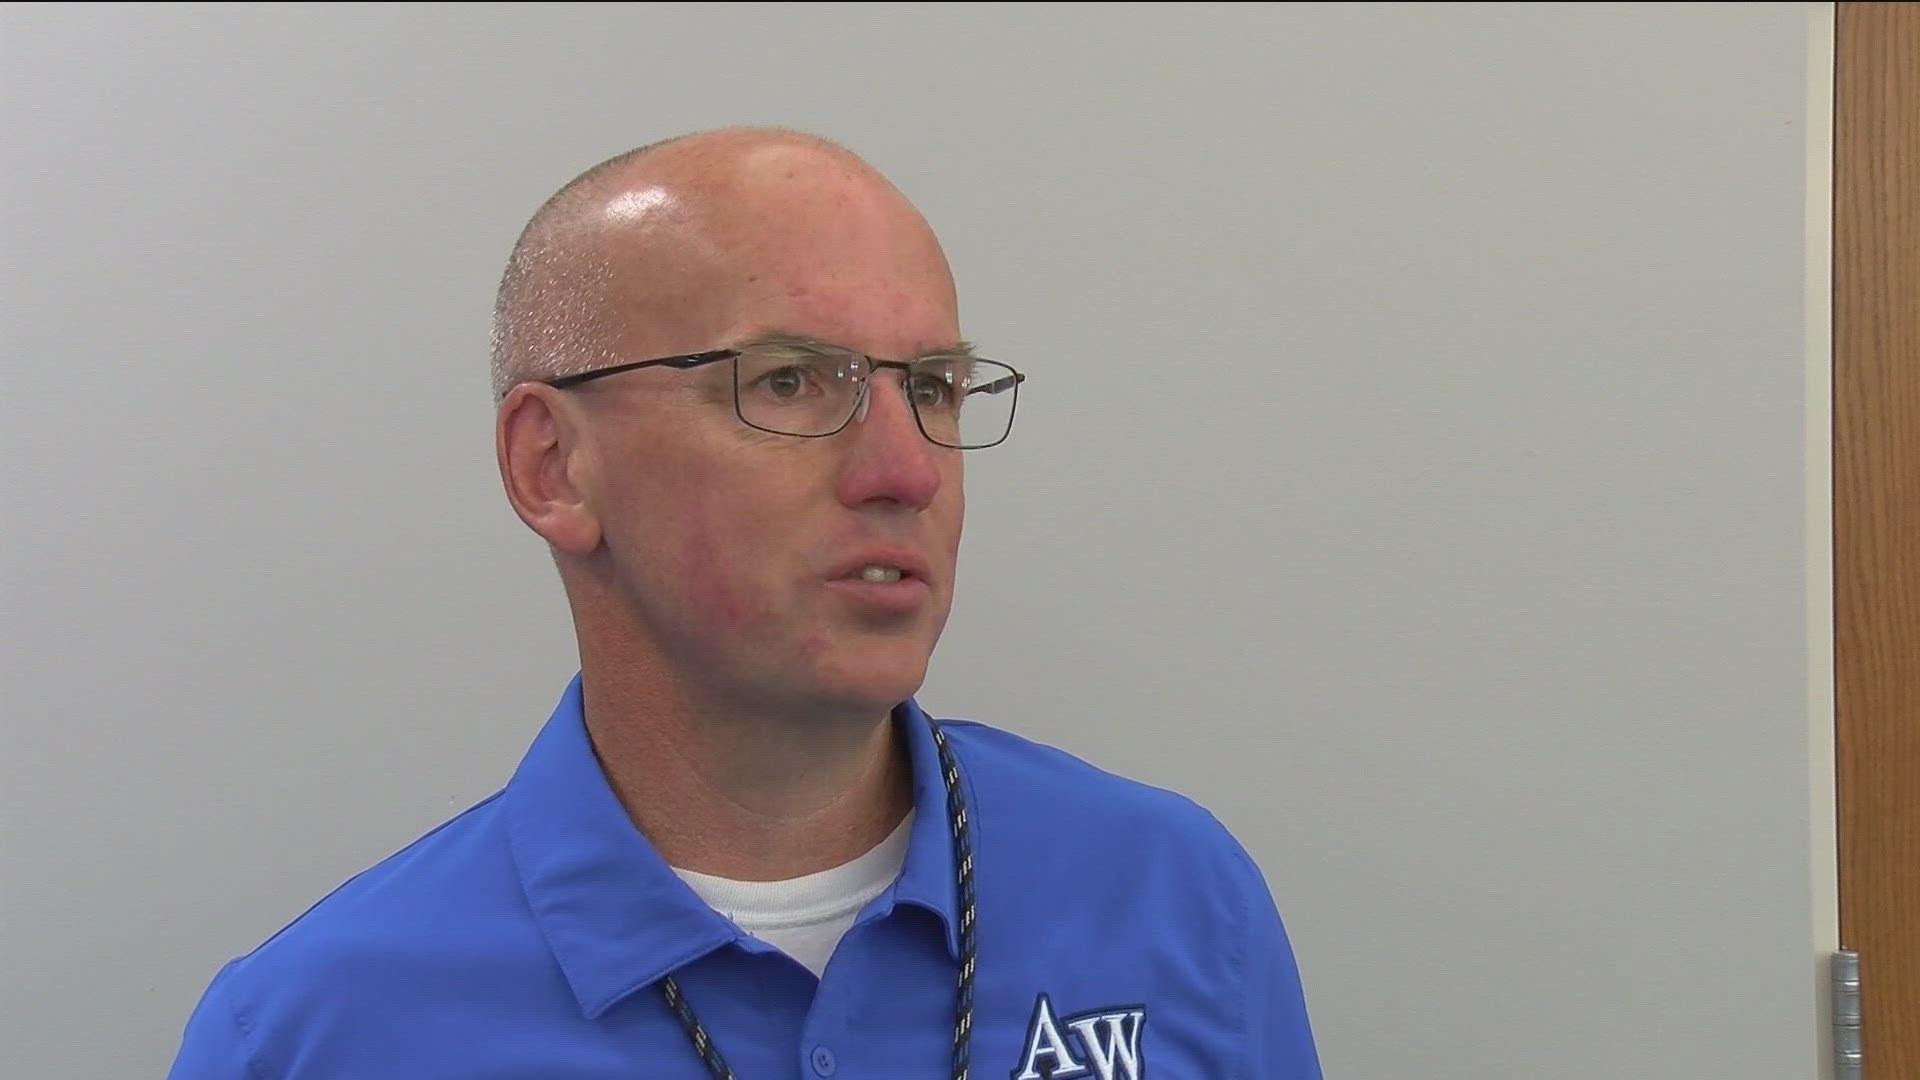 Jim Fritz is leaving the Anthony Wayne Local School District for the superintendent job at Oregon City Schools.